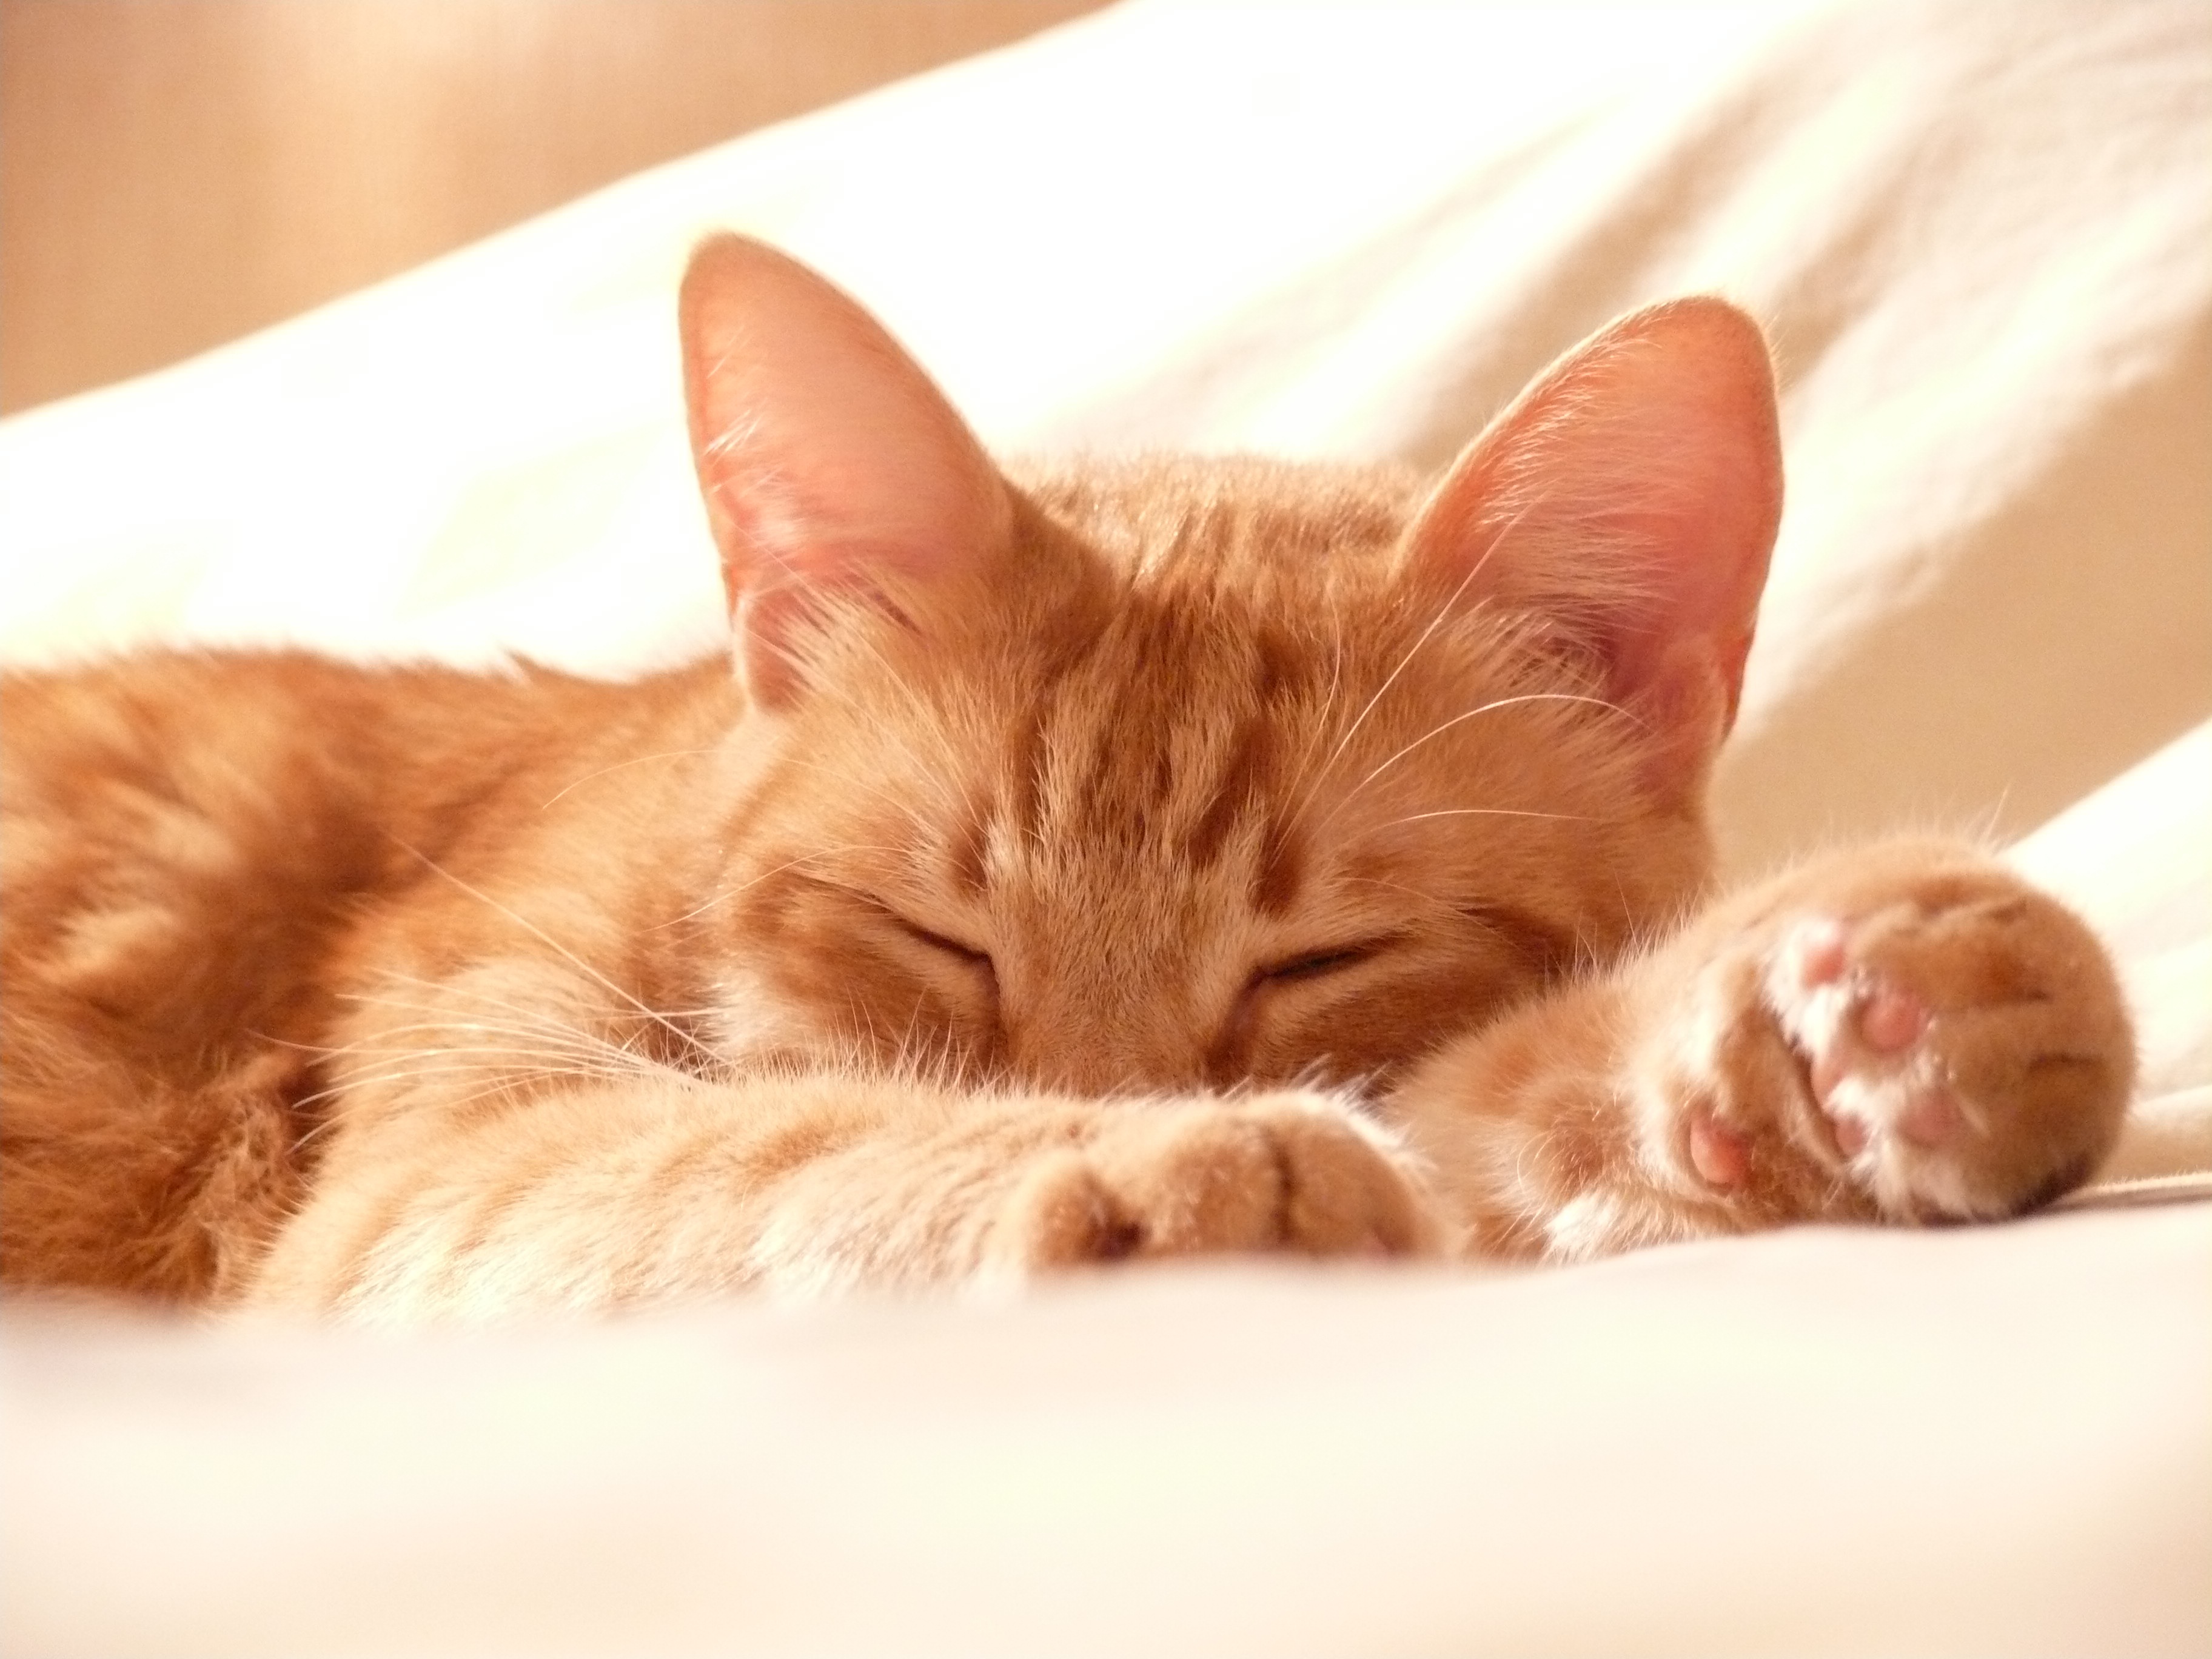 64568 Screensavers and Wallpapers Paws for phone. Download cat, animals, muzzle, sleep, dream, paws pictures for free